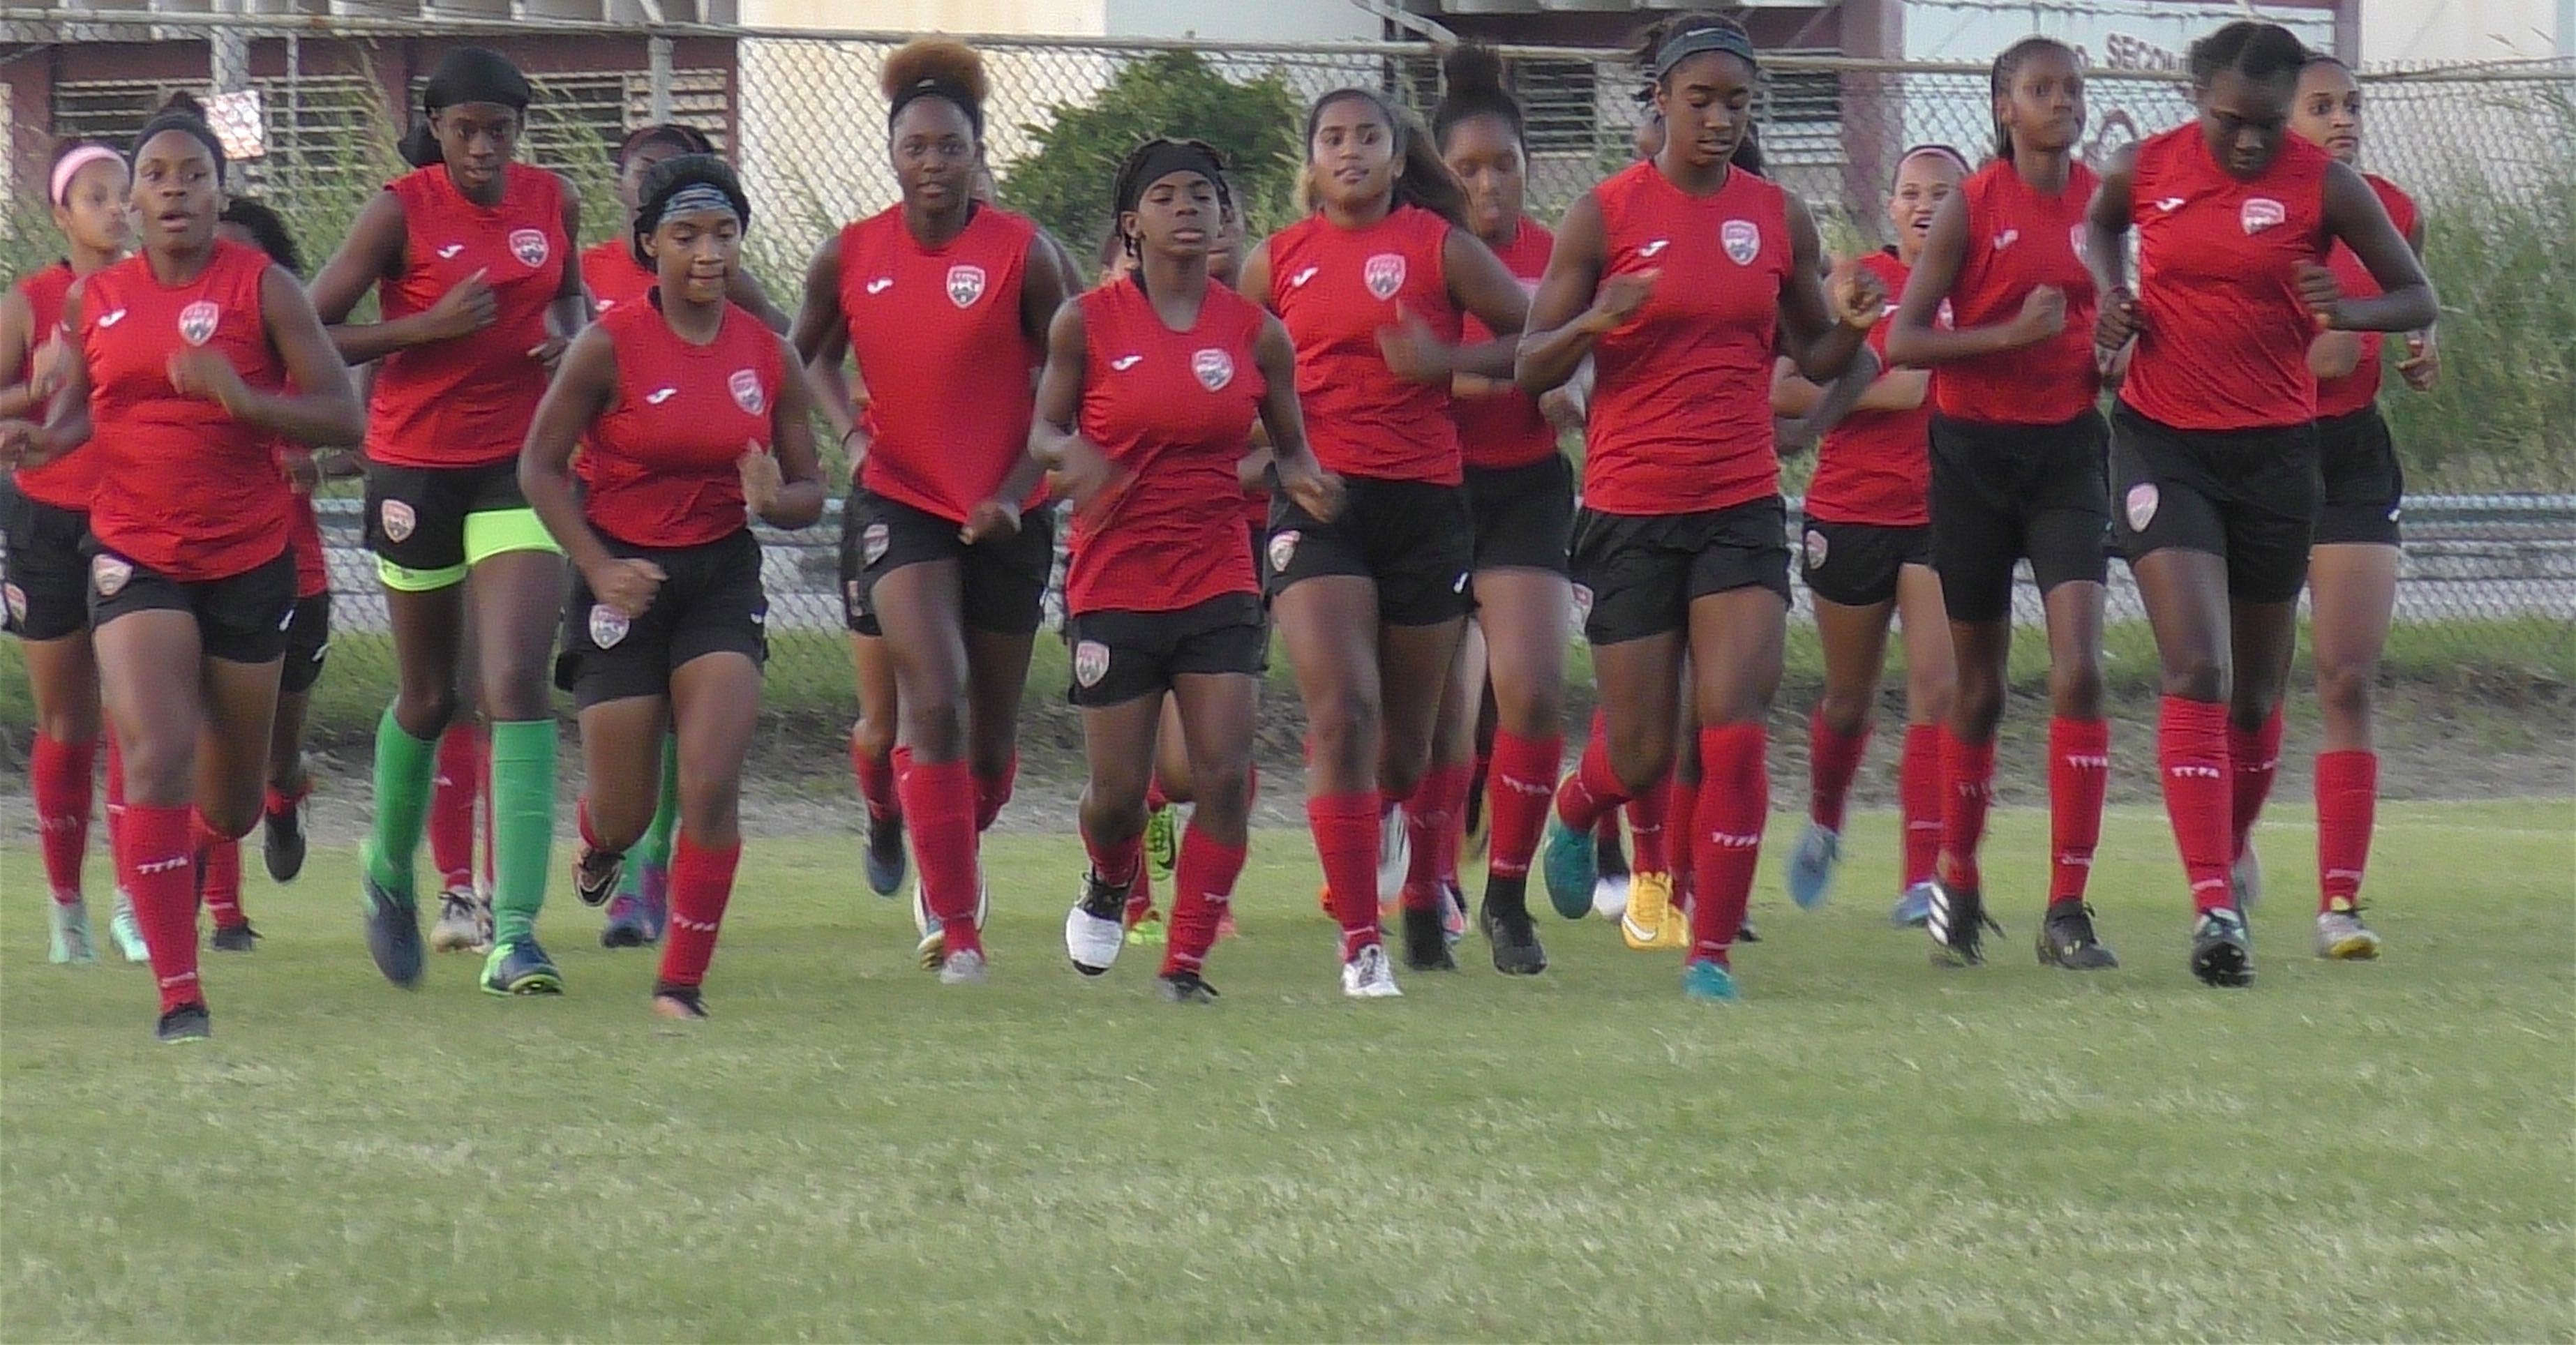 Additional Technical Support for U-20 Women in preparation for Concacaf qualifiers.